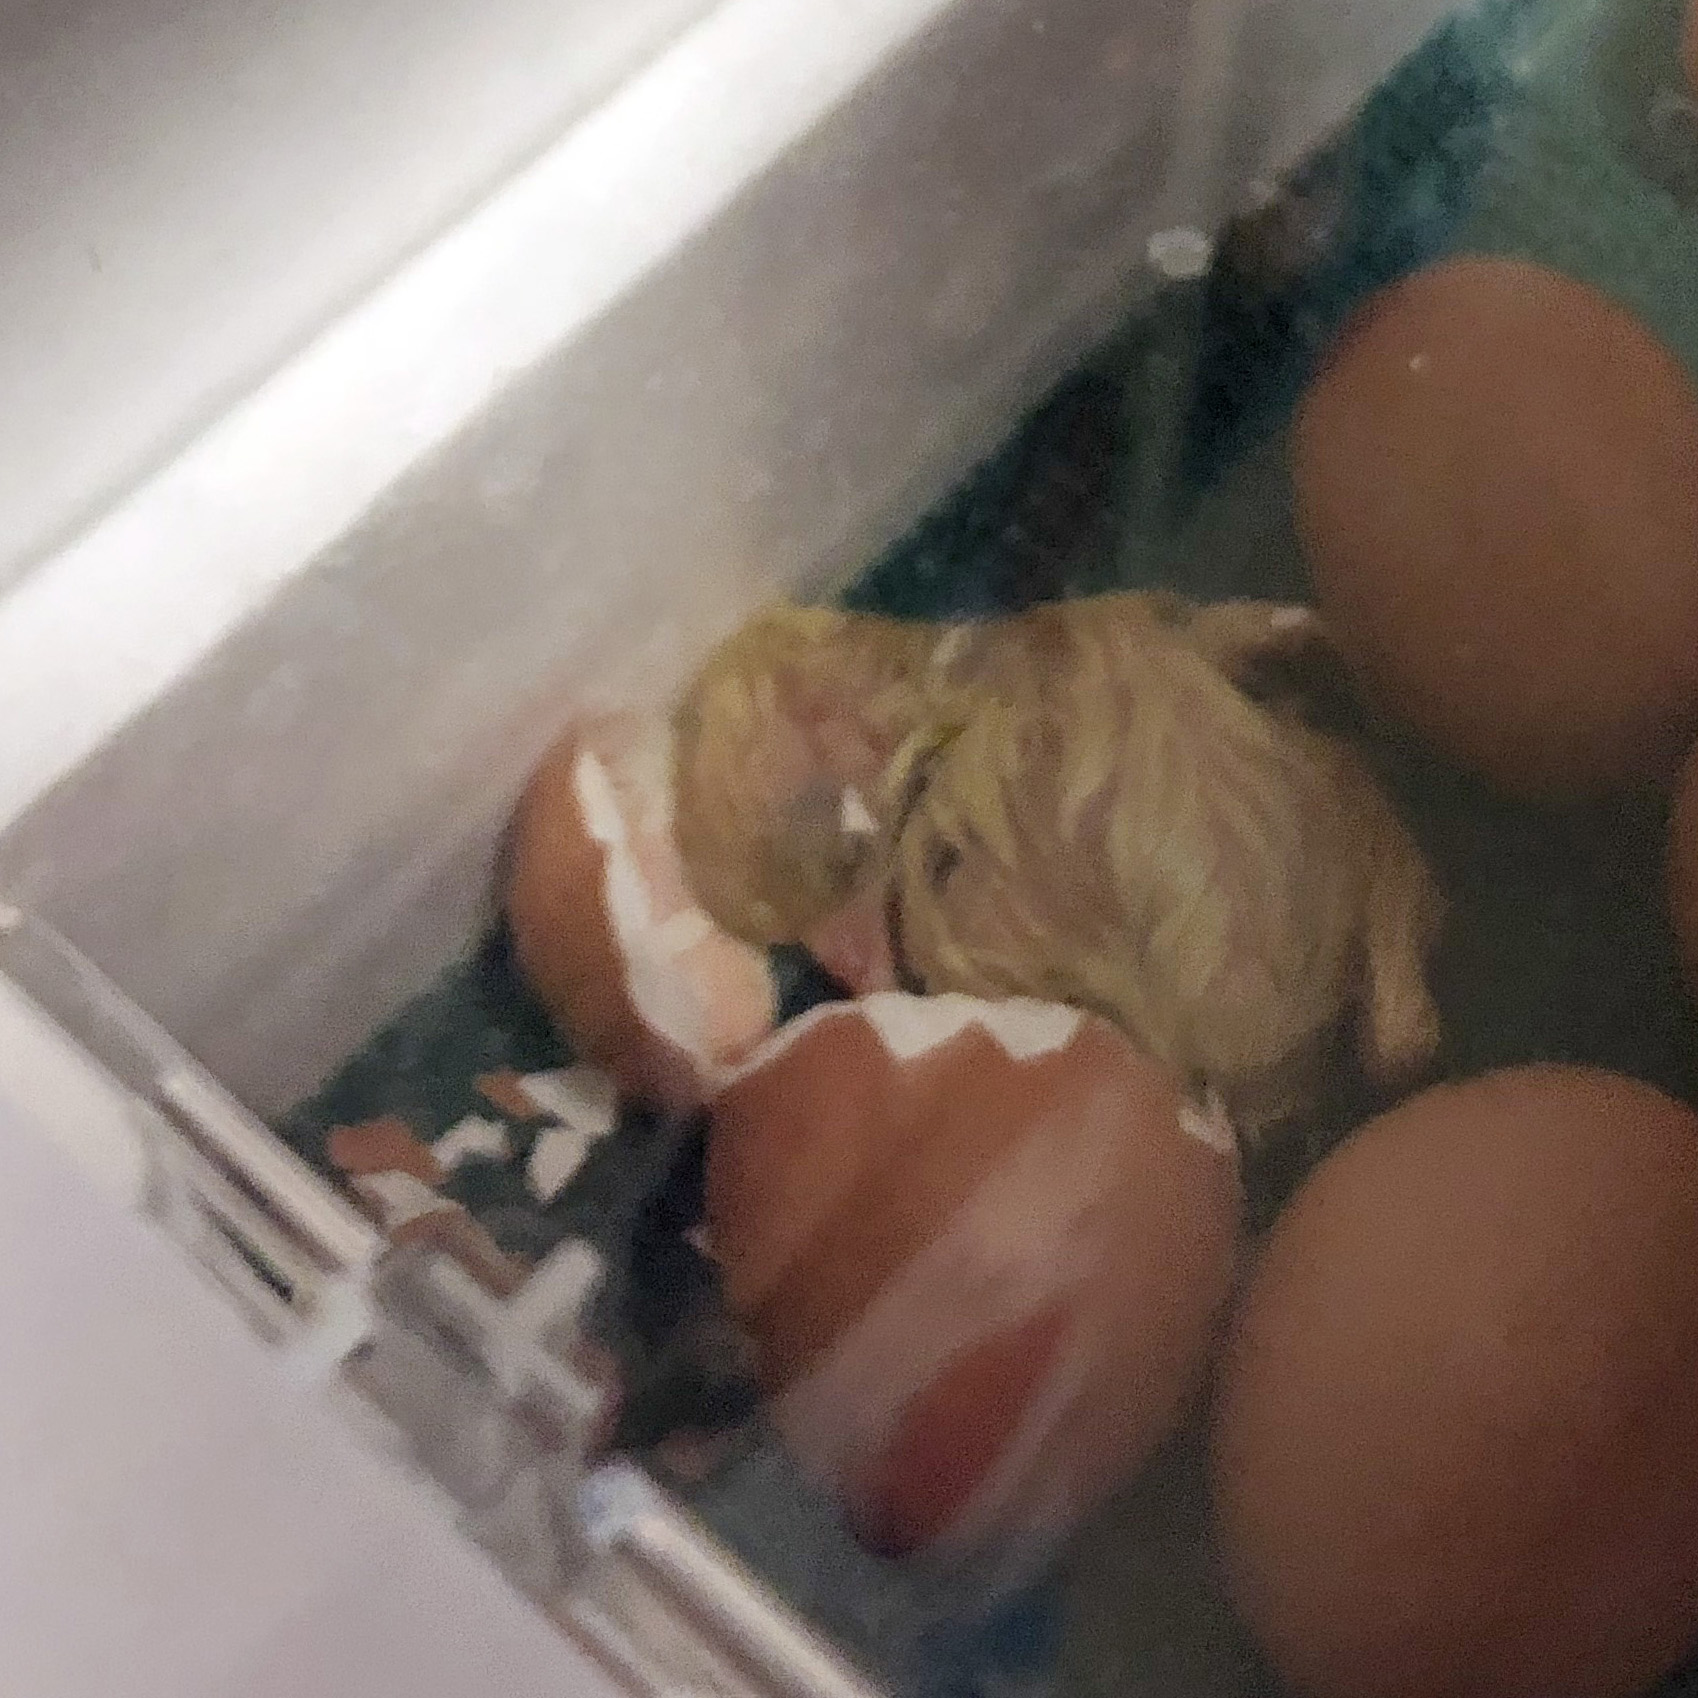 A newly hatched chick lays near its cracked shell in an incubator 